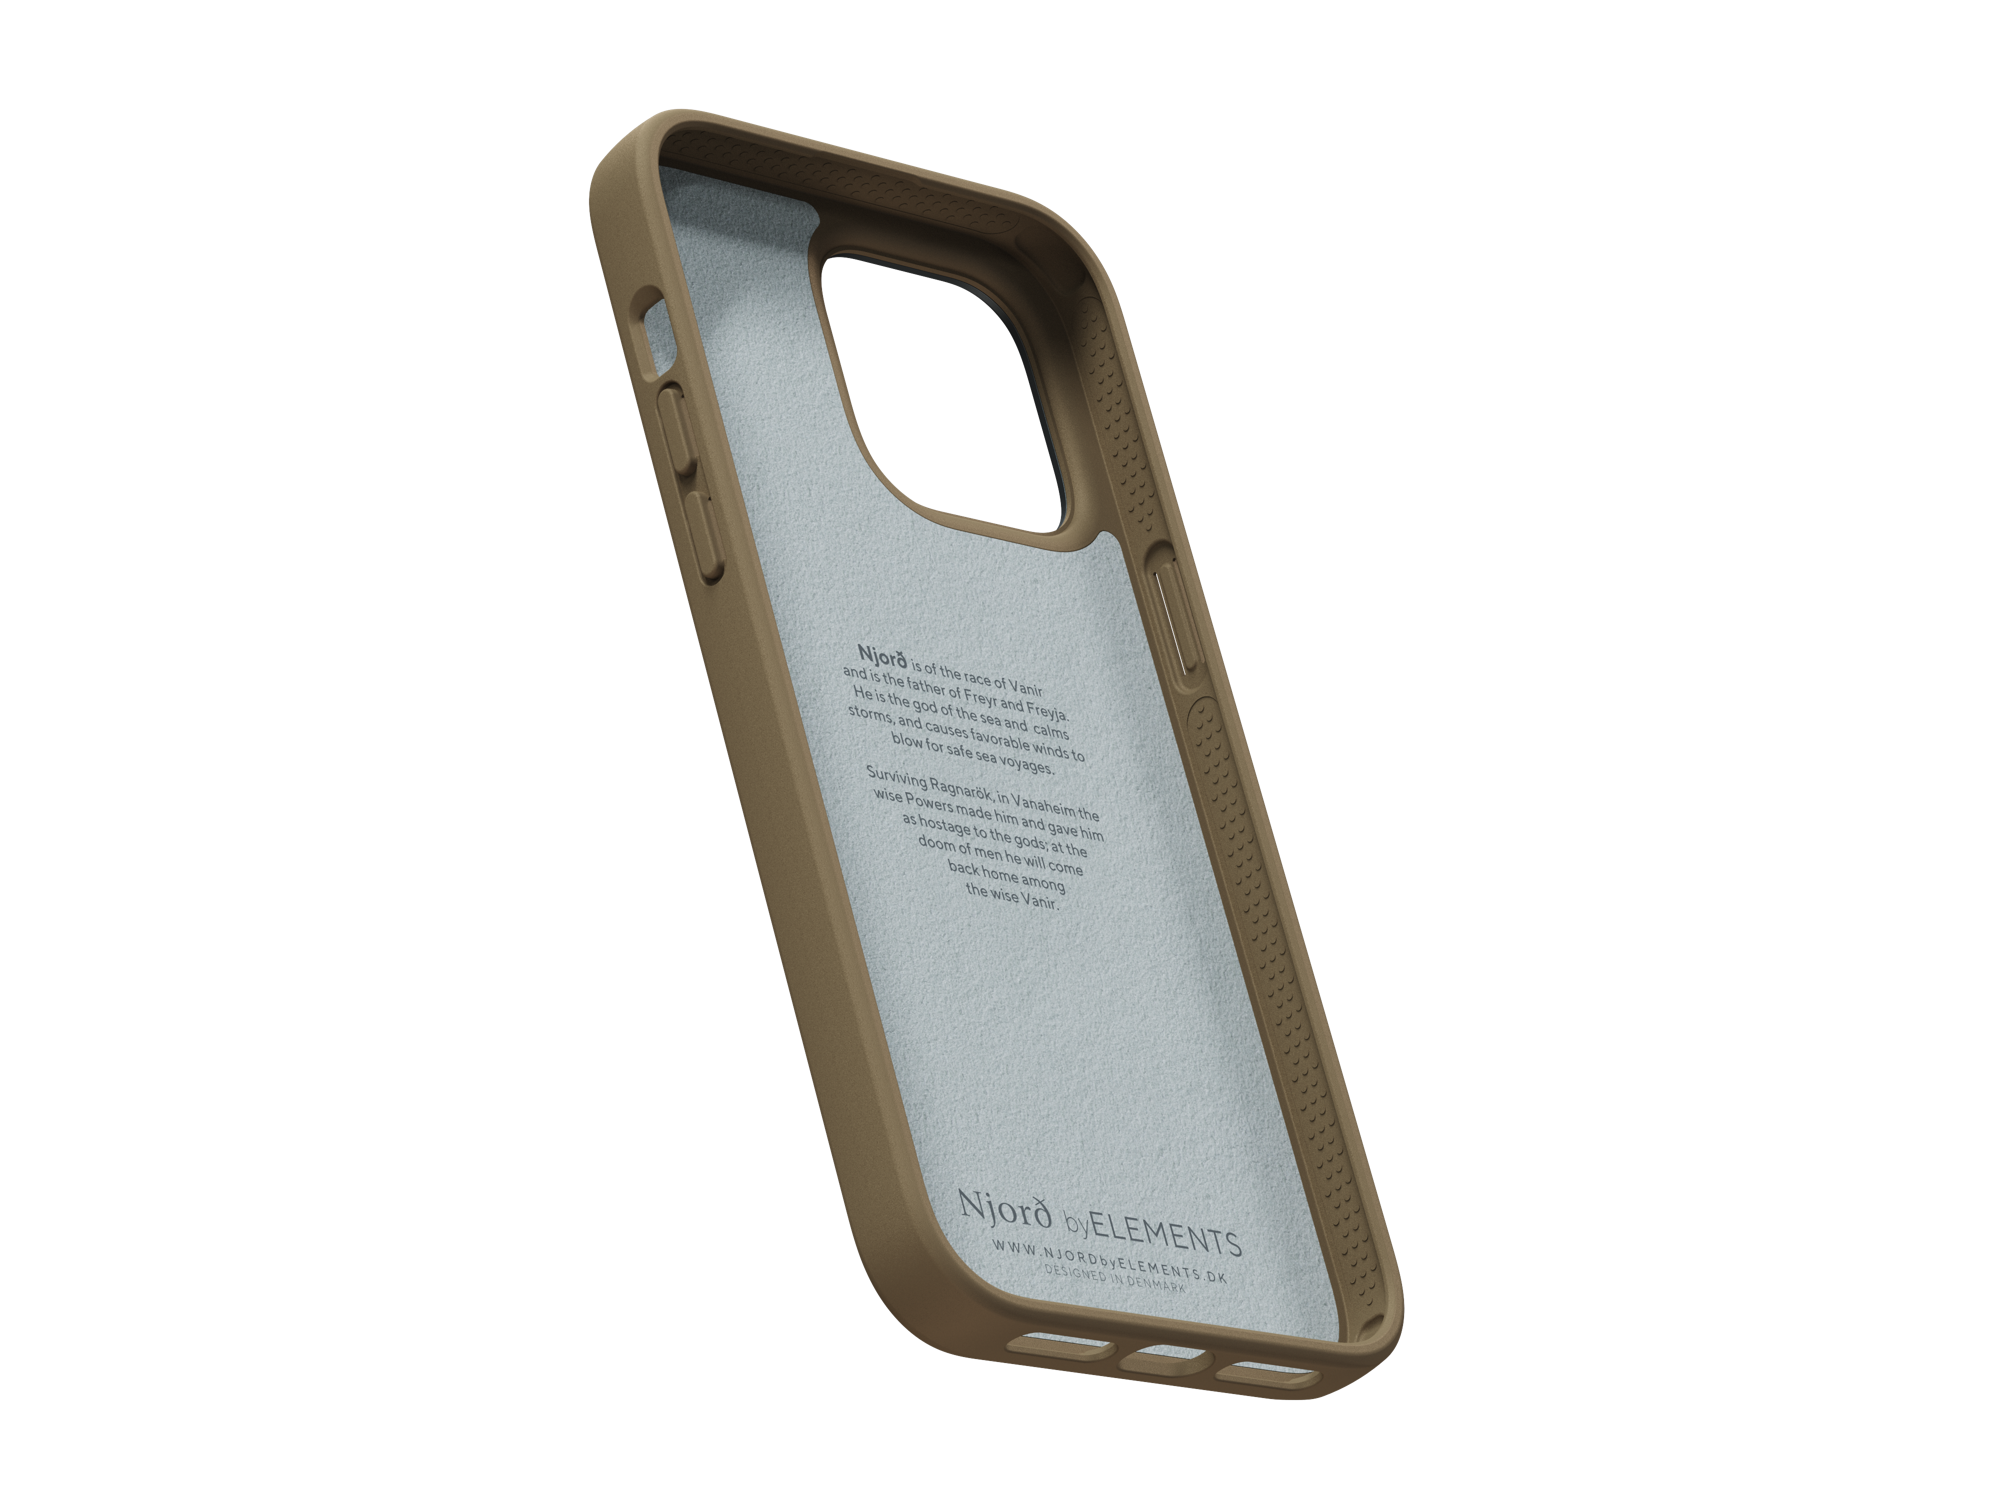 14 Backcover, Comfort+, NJORD iPhone Max, Pro Camel Apple,